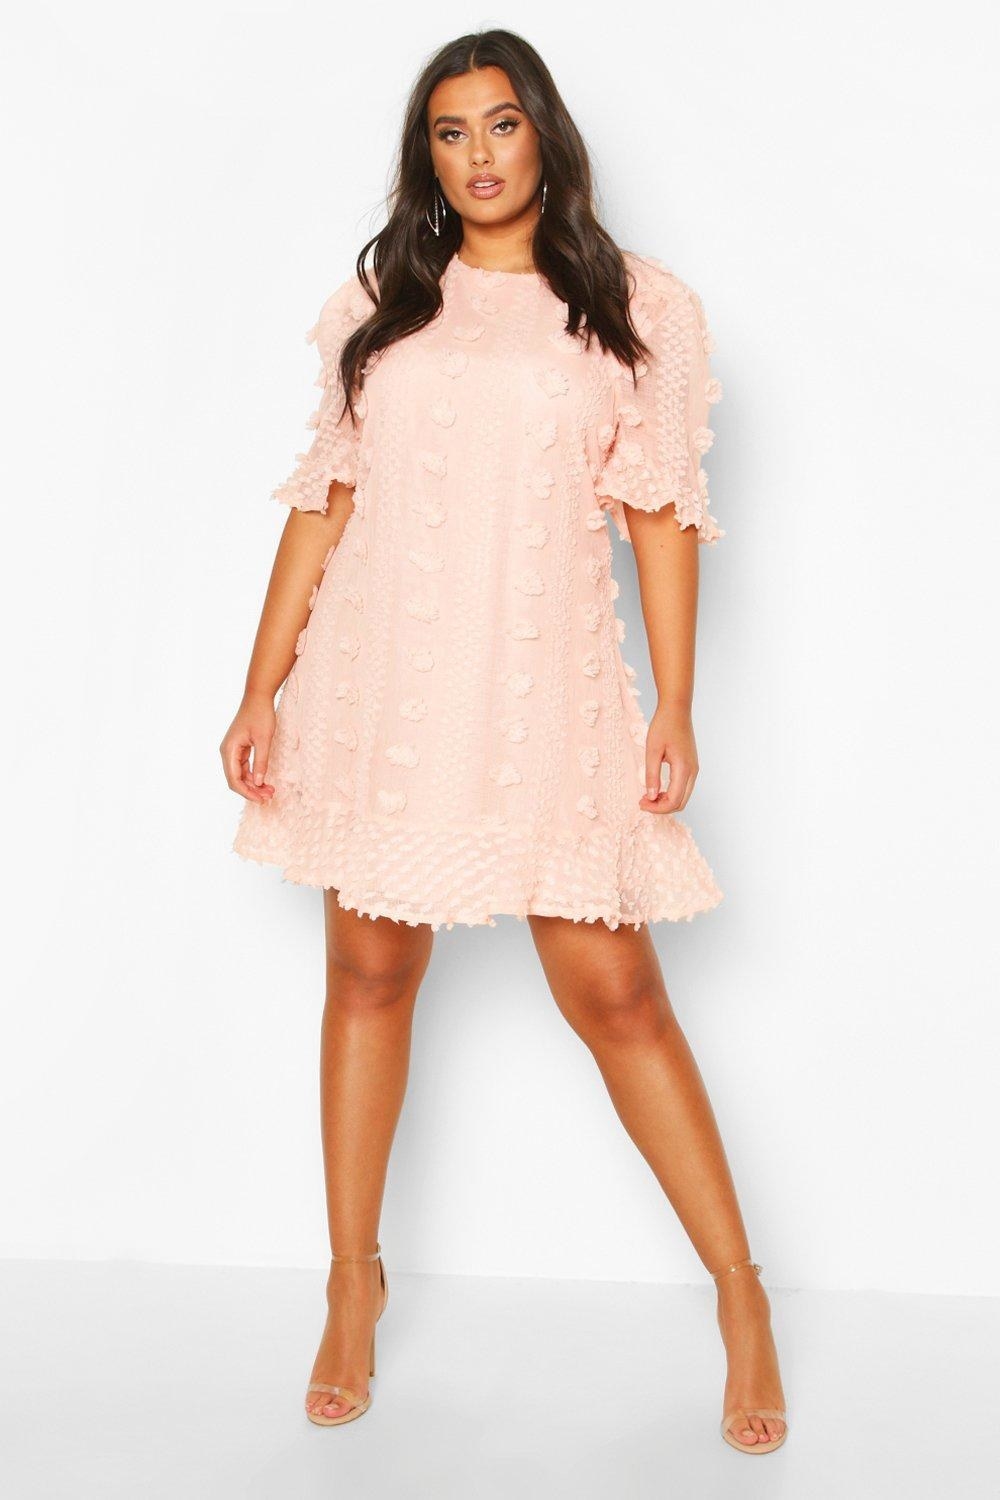 a model in the blush smocked dress